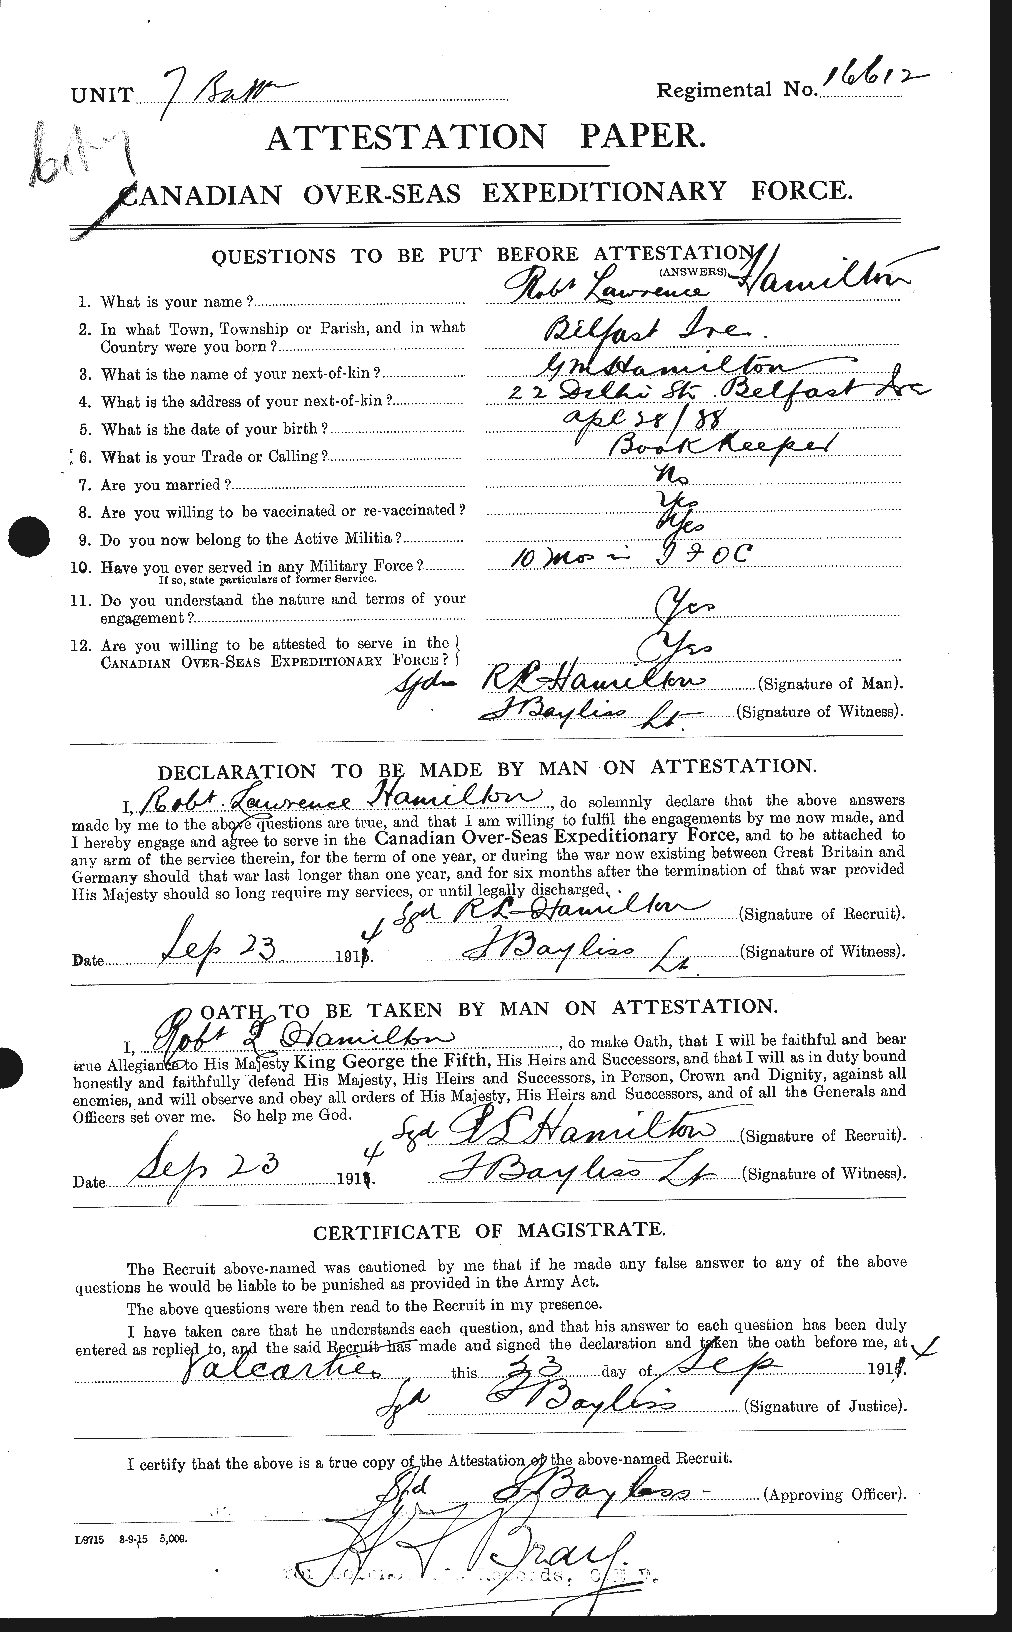 Personnel Records of the First World War - CEF 373264a